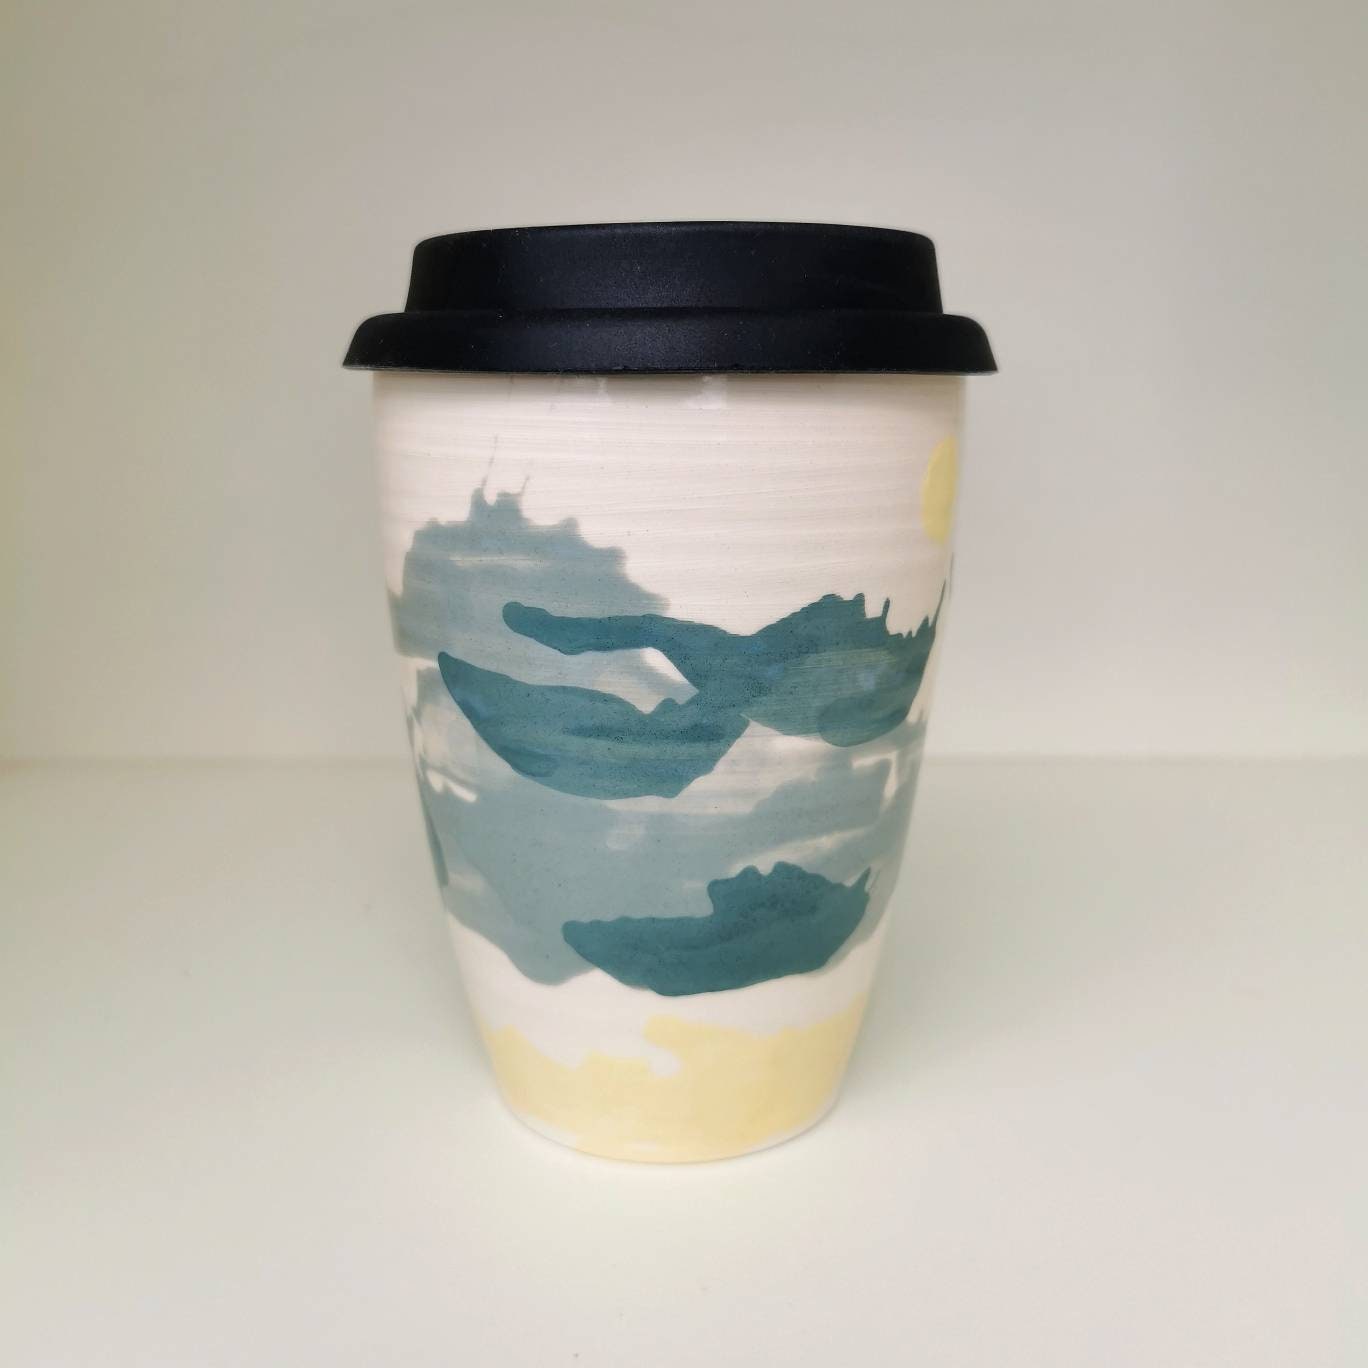 Pottery Travel Mug No Spill Wide Base Narrow Top Ceramic Coffee Cup In  Landscape Layers of Glaze Blue Green Grey Water Mountains